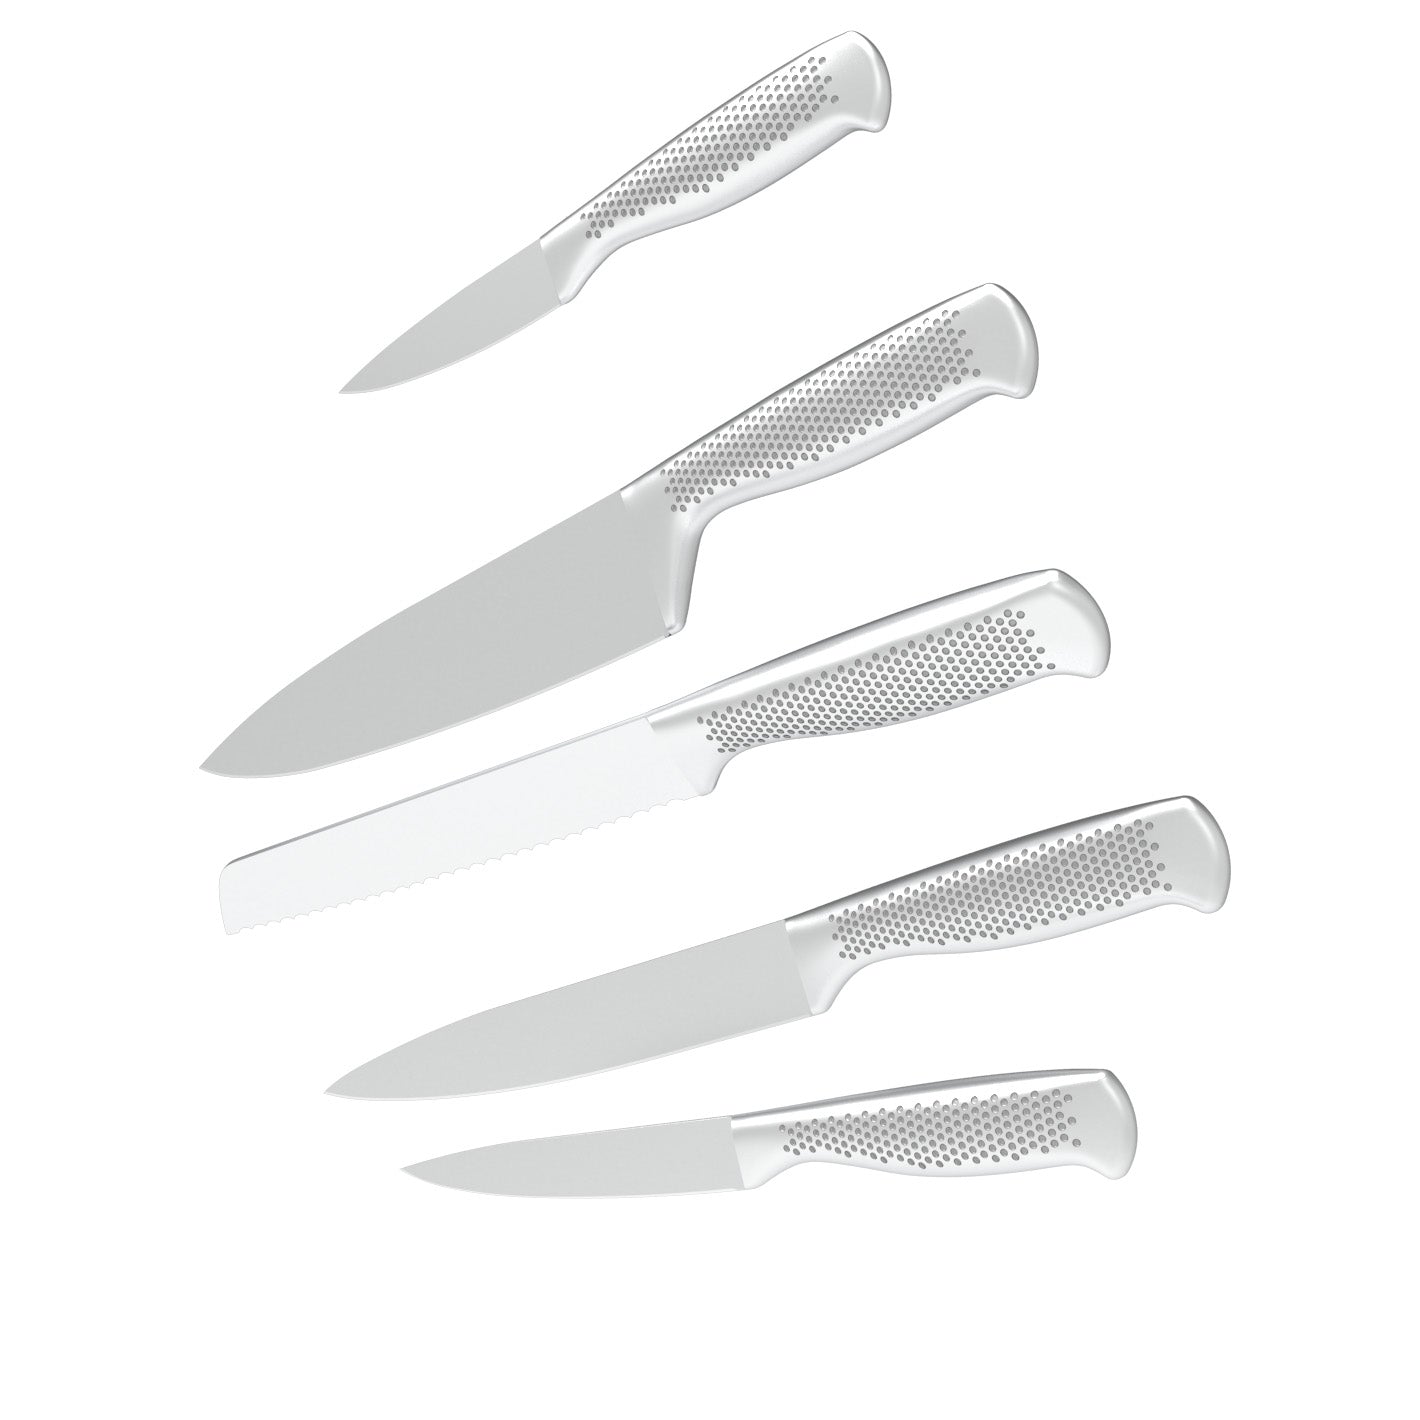 Voodoo/TheEx "Classic Edition" Knife Set - Spare Knives